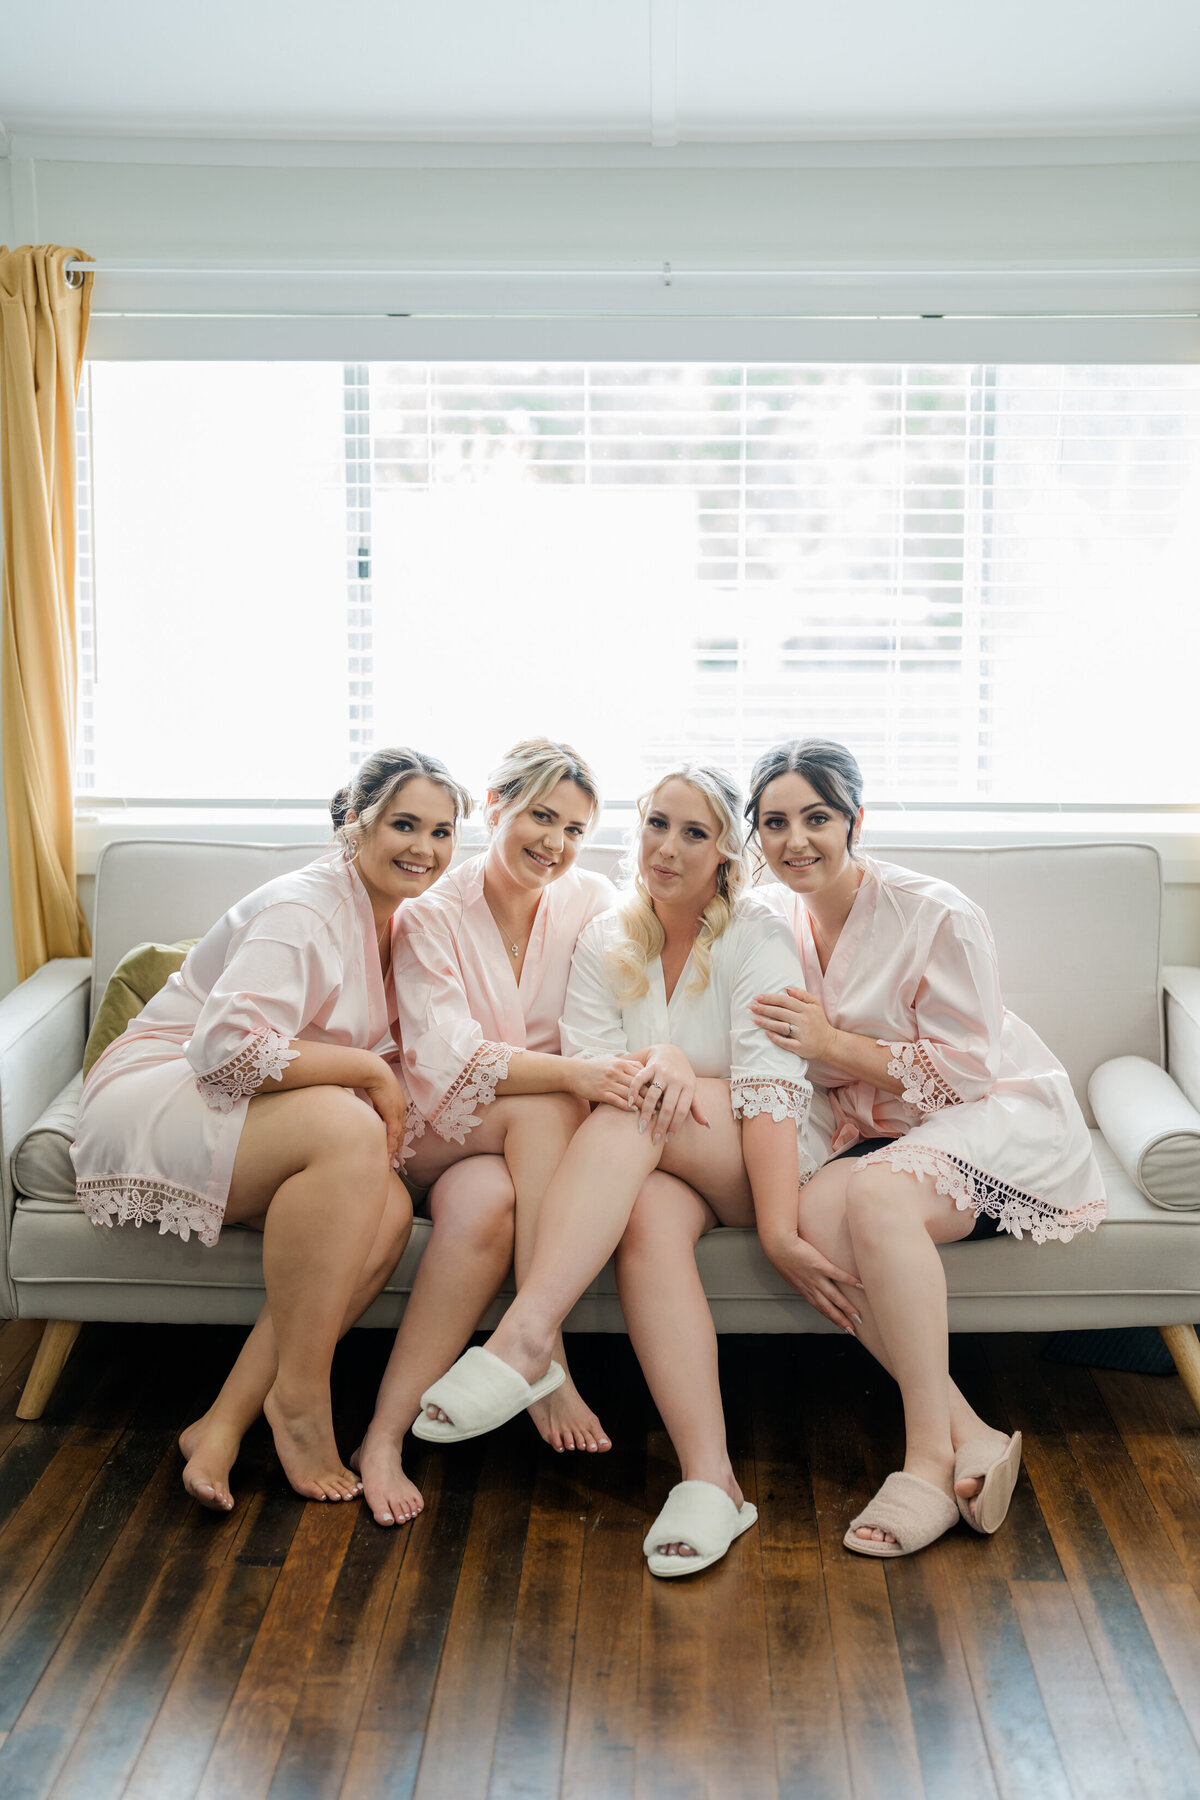 Bridemaids sitting with a bride on her wedding day